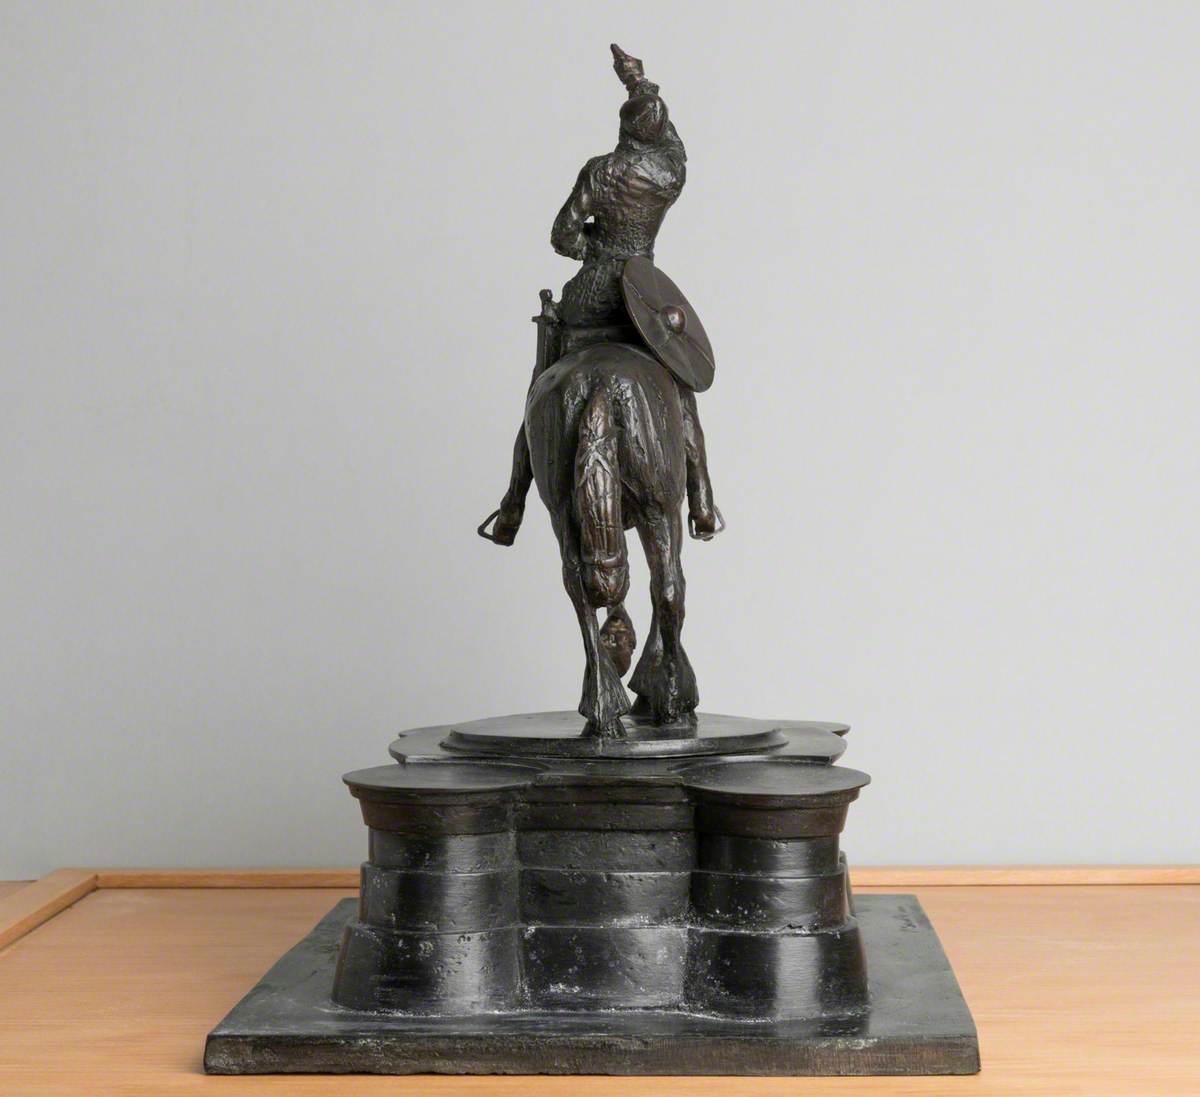 Maquette for a Godred Crovan Memorial